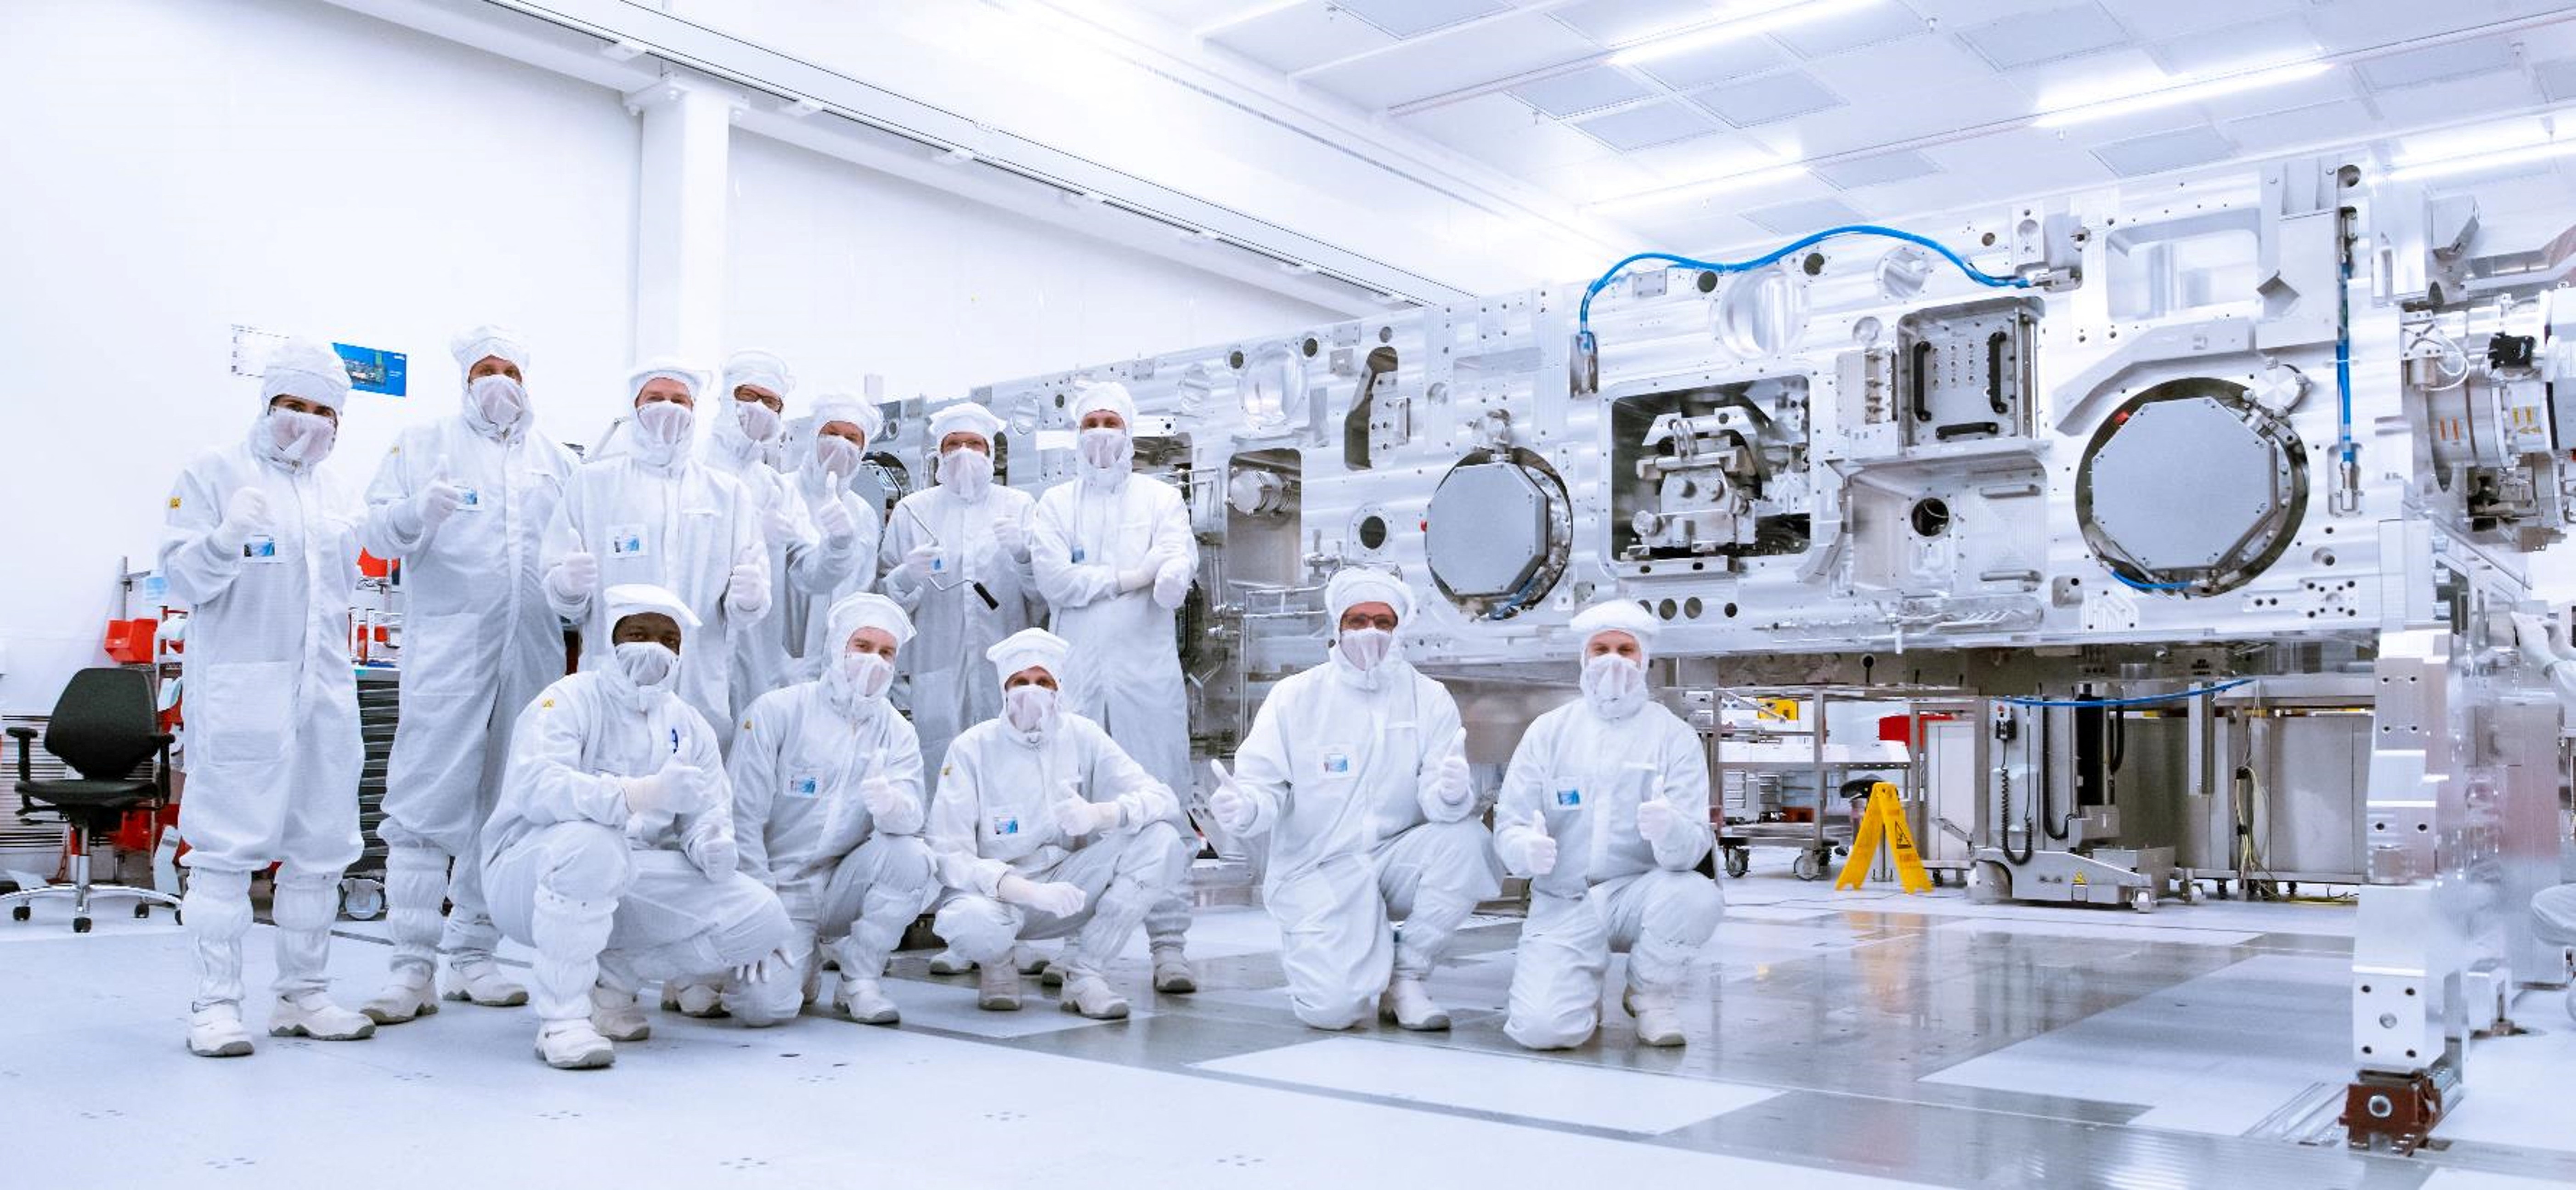 ASML employees pose in front of the partially completed frame of the company’s newest product